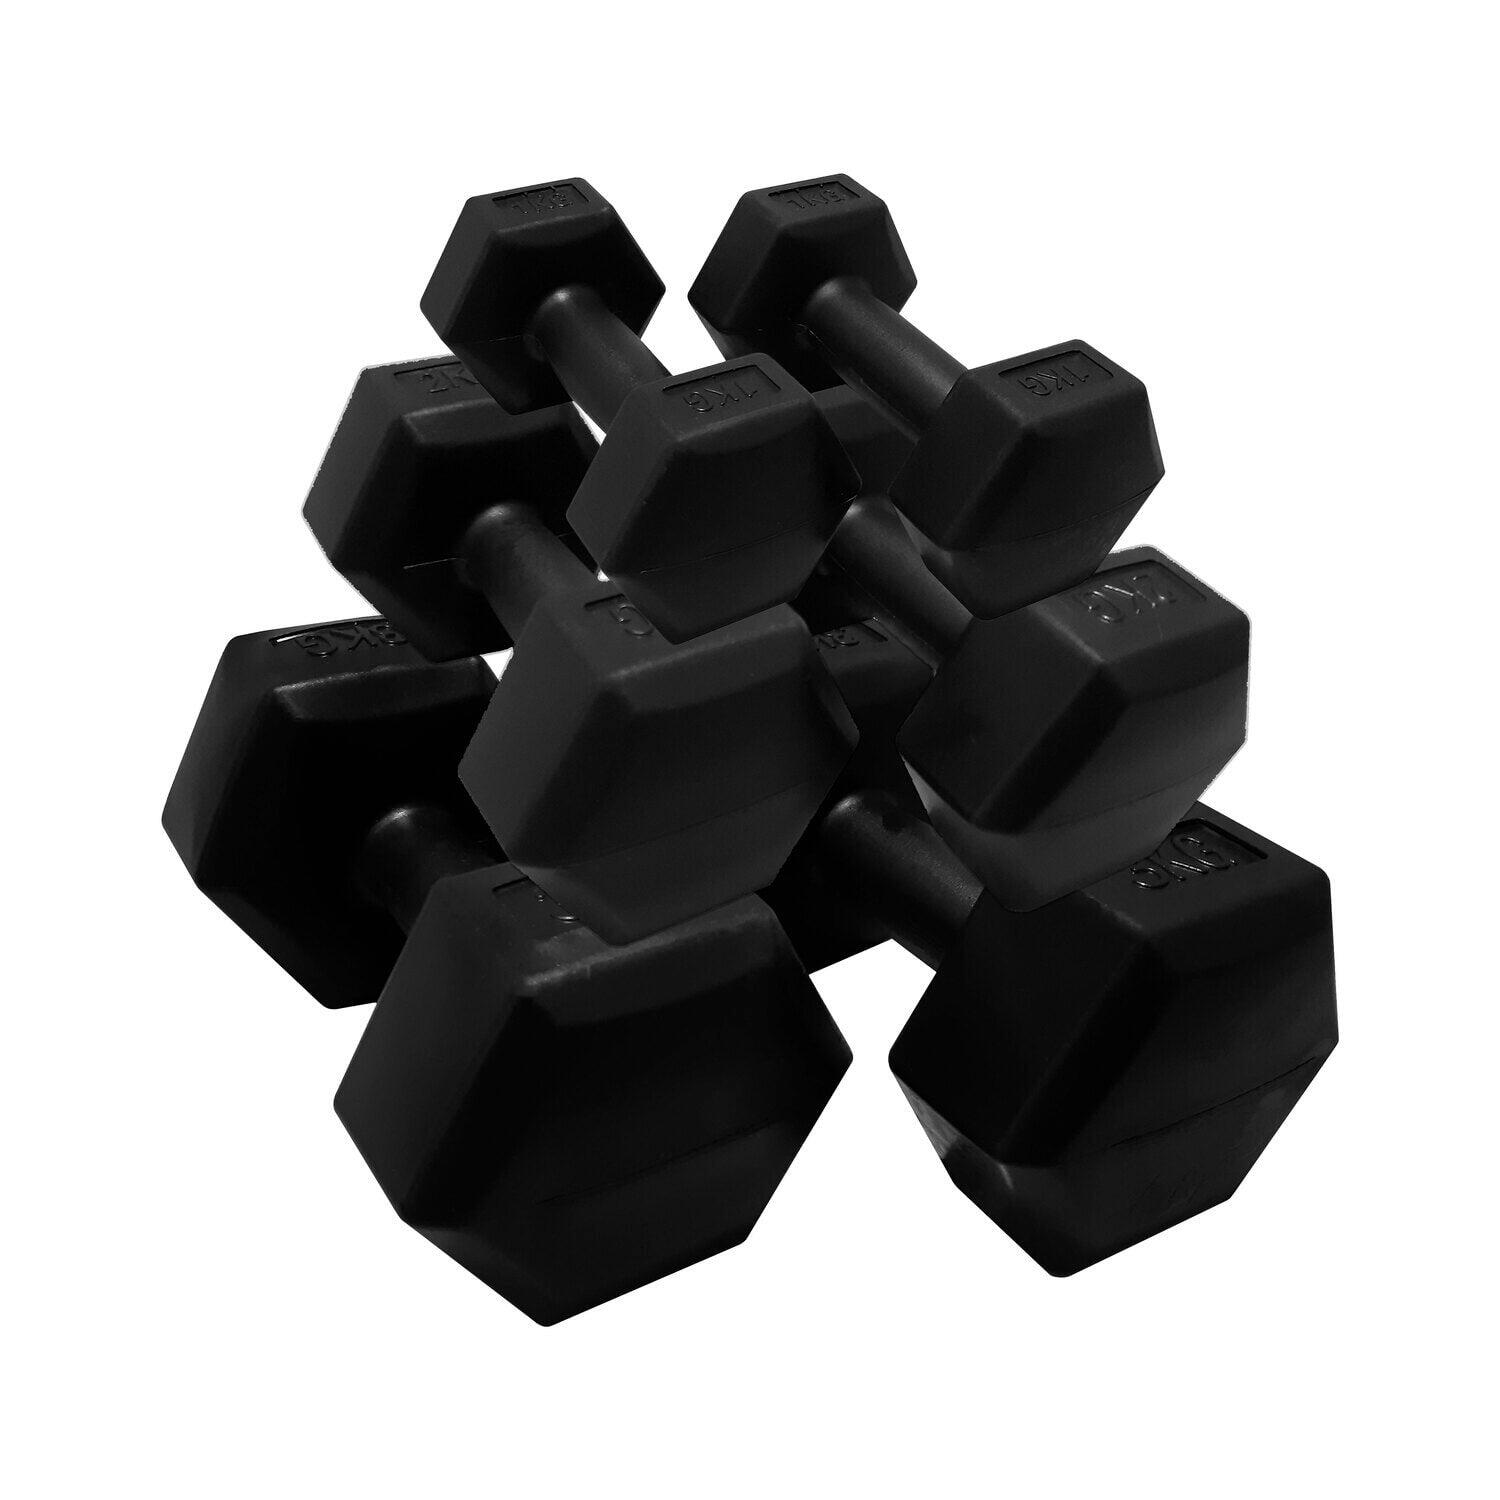 HXGN 12kg Hex Dumbbell Weight Set 1/4